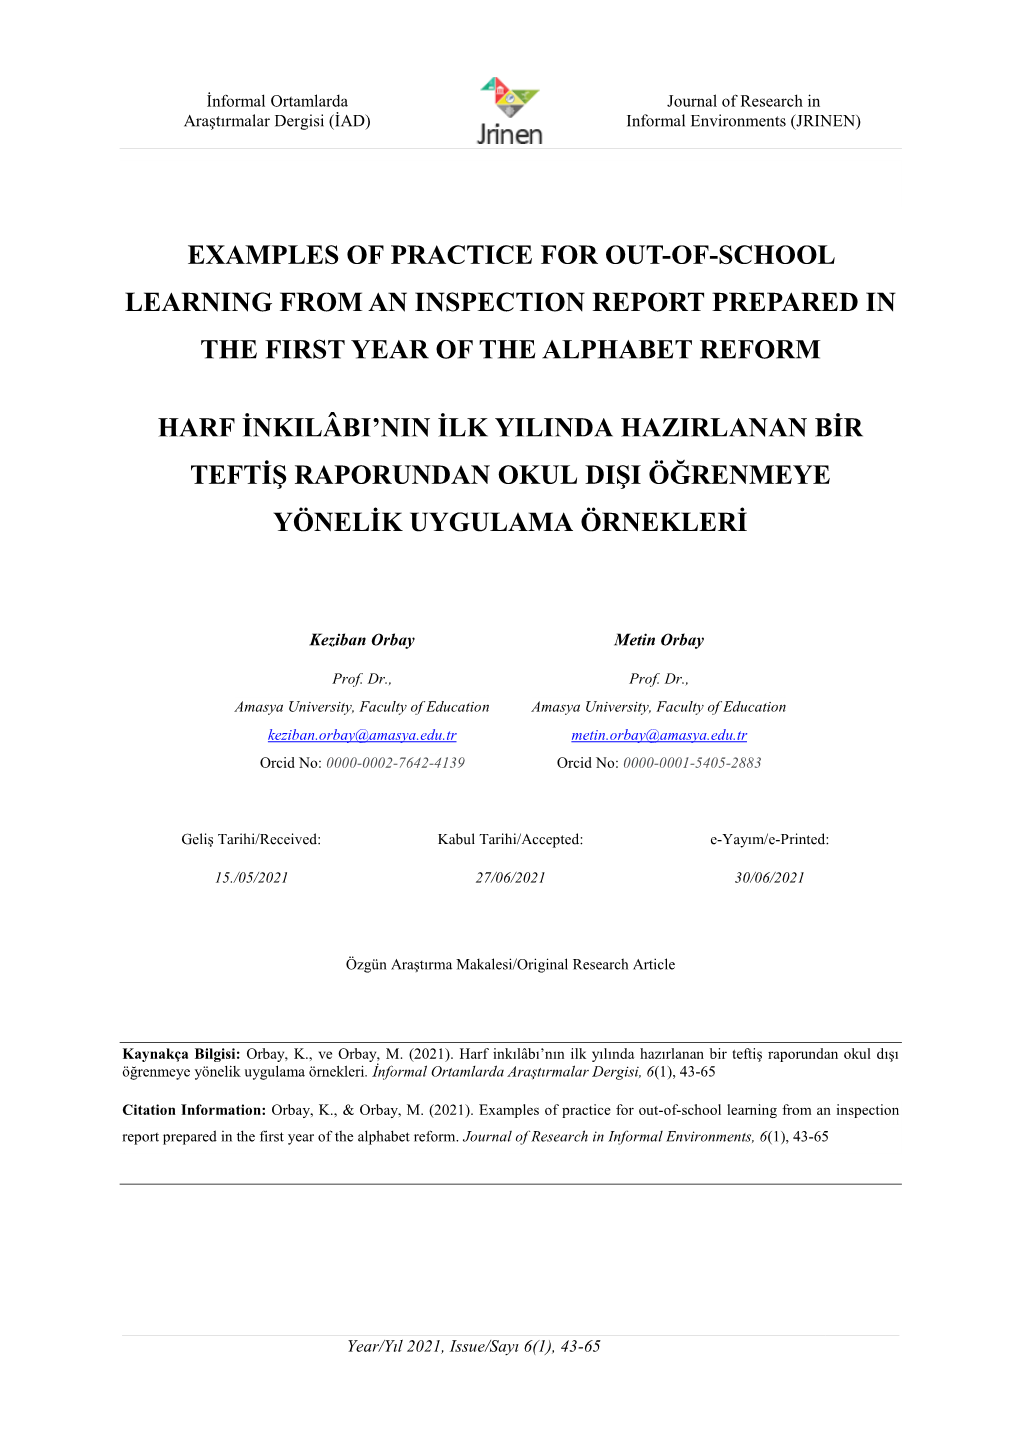 Examples of Practice for Out-Of-School Learning from an Inspection Report Prepared in the First Year of the Alphabet Reform